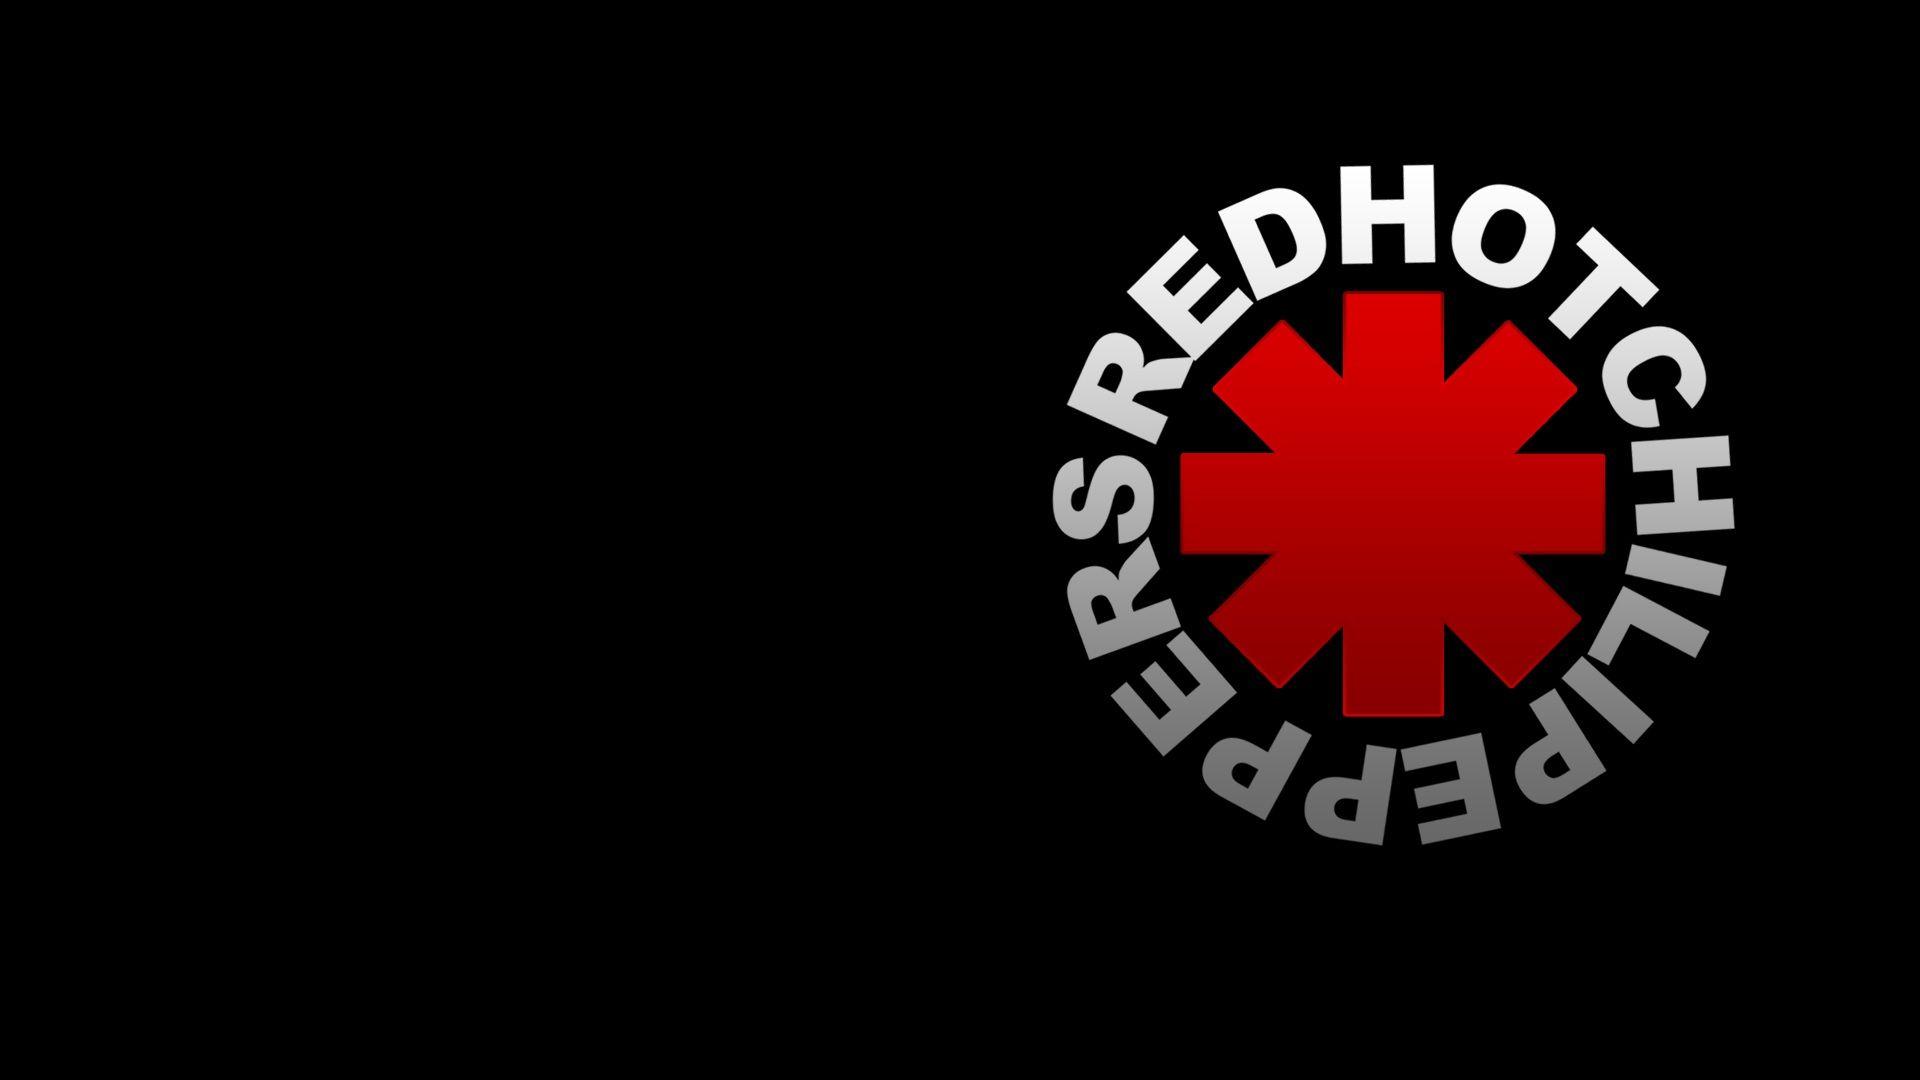 Red Hot Chili Peppers  Wallpaper  Red hot chili peppers art Red hot  chili peppers poster Red hot chili peppers